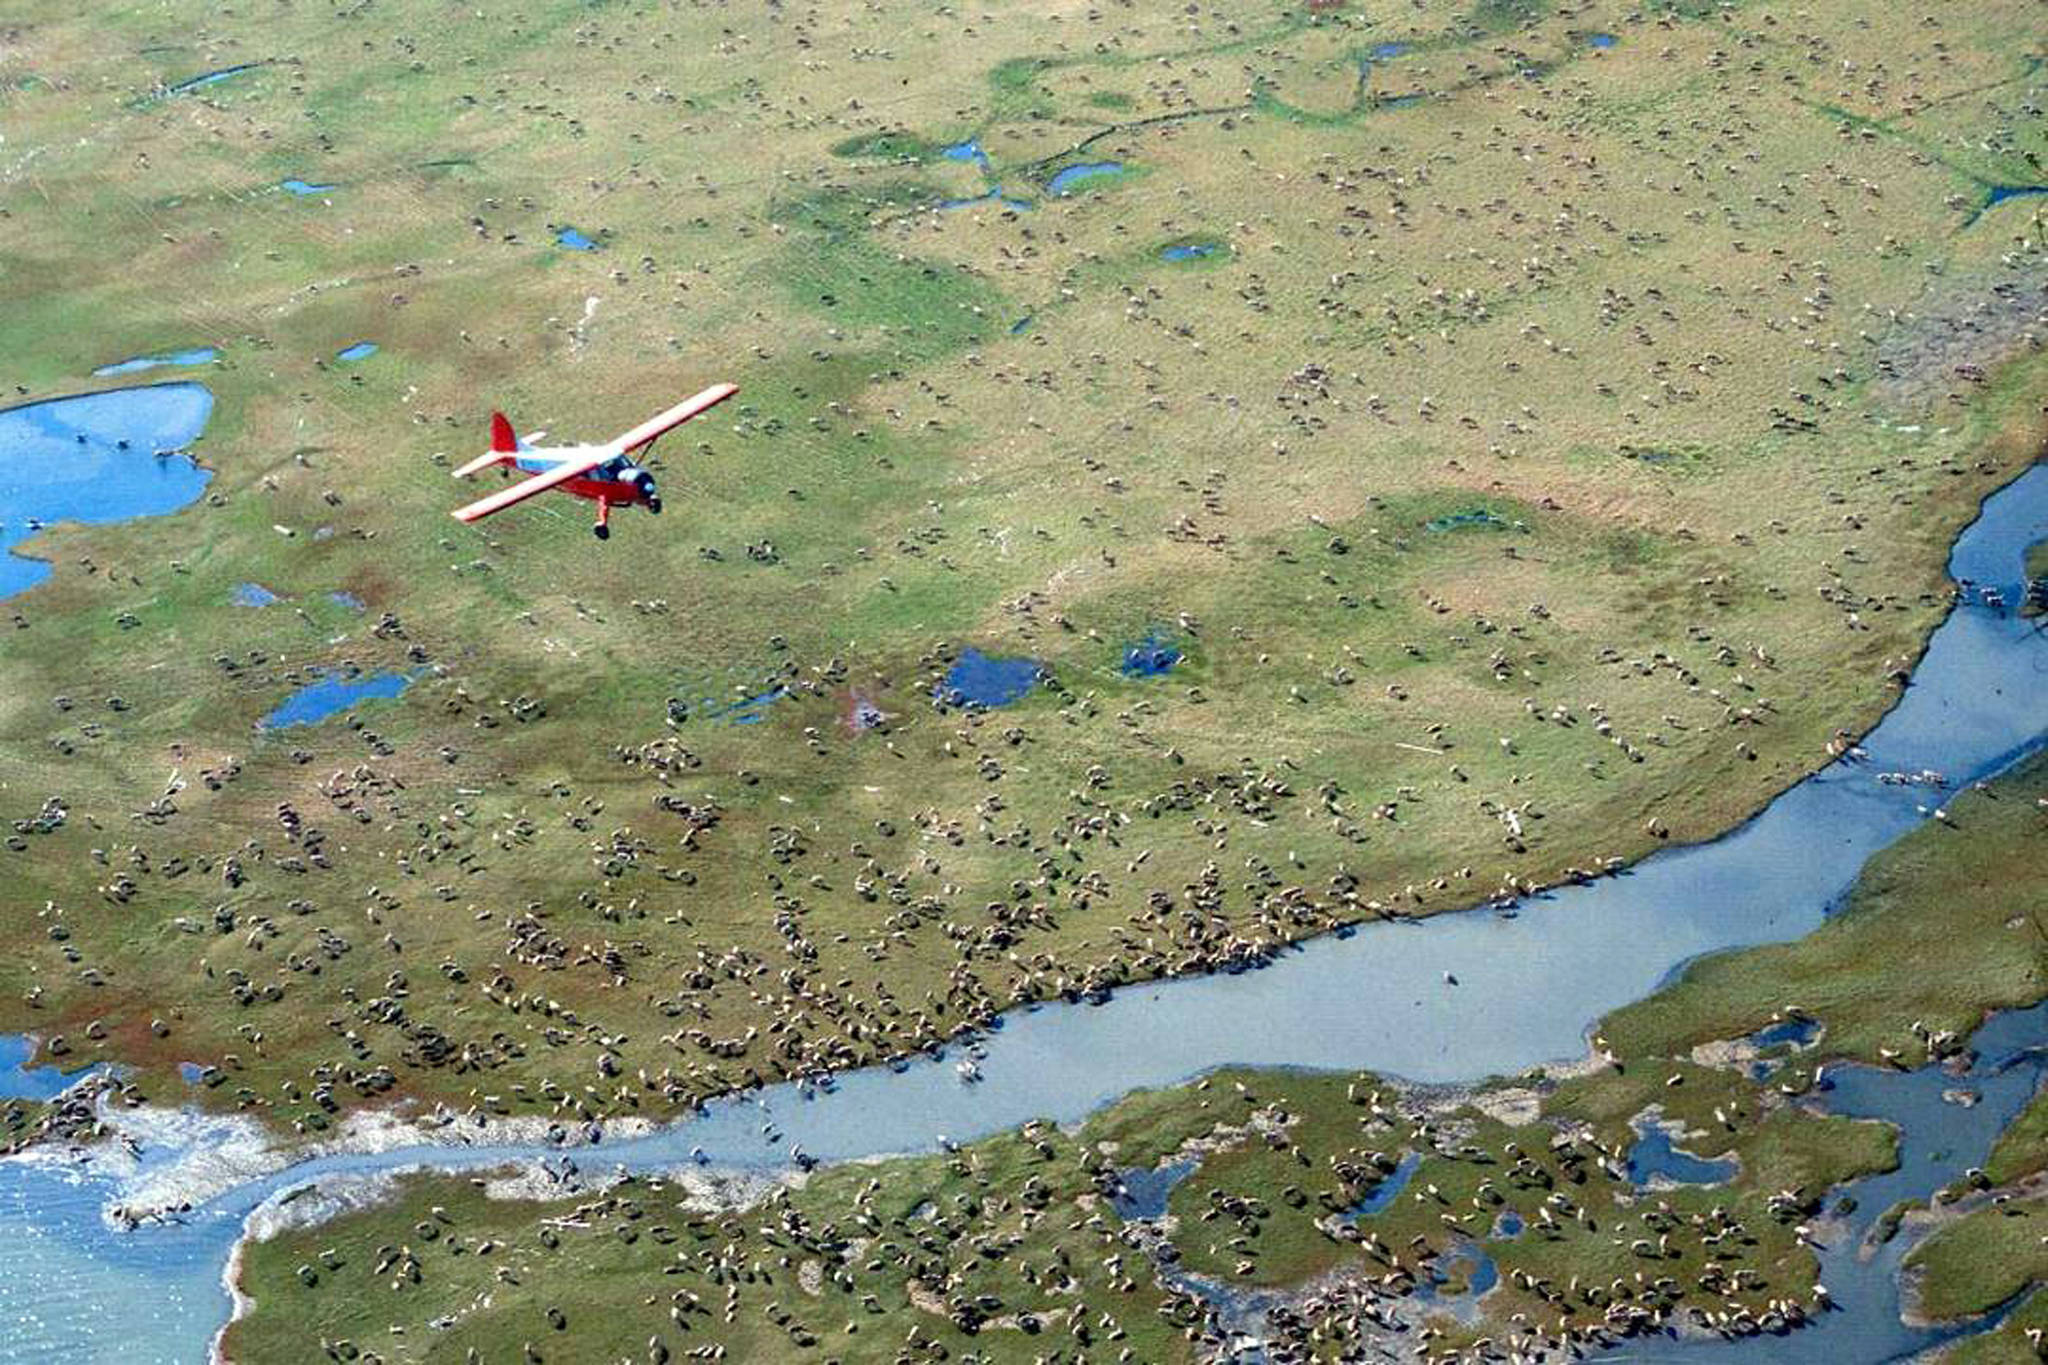 An airplane flies over caribou from the Porcupine caribou herd on the coastal plain of the Arctic National Wildlife Refuge in northeast Alaska. Conservationists will try to persuade a U.S. judge to stop the Trump administration from issuing leases to oil and gas companies in the Arctic National Wildlife Refuge. The Anchorage Daily News reported that the videoconference Monday, Jan. 4, 2021, in U.S. District Court in Anchorage is expected to determine whether the Bureau of Land Management can open bids in an online lease sale scheduled for Wednesday. The agency has offered 10-year leases on 22 tracts covering about 1,563 square miles in the coastal plain, which accounts for about 5% of the refuge’s area. (Courtesy Photo / U.S. Fish and Wildlife Service)